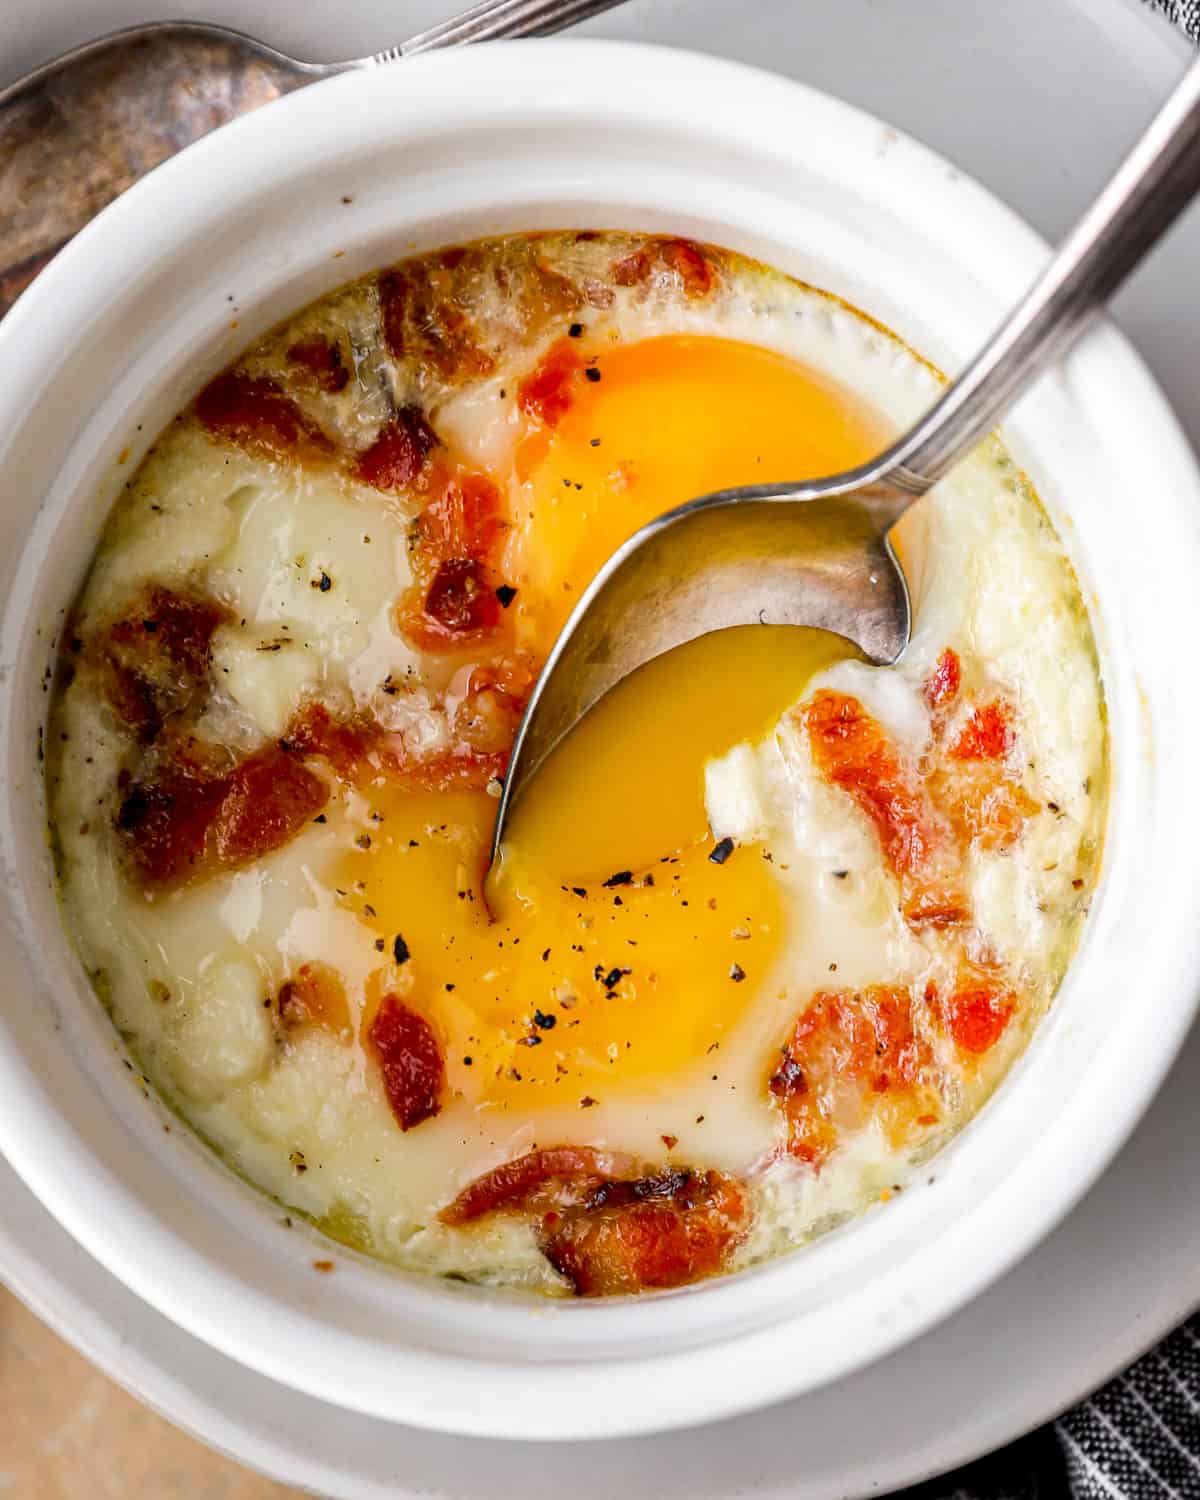 spoon digging into a cup of oven baked eggs, with bits of bacon and feta mixed in.